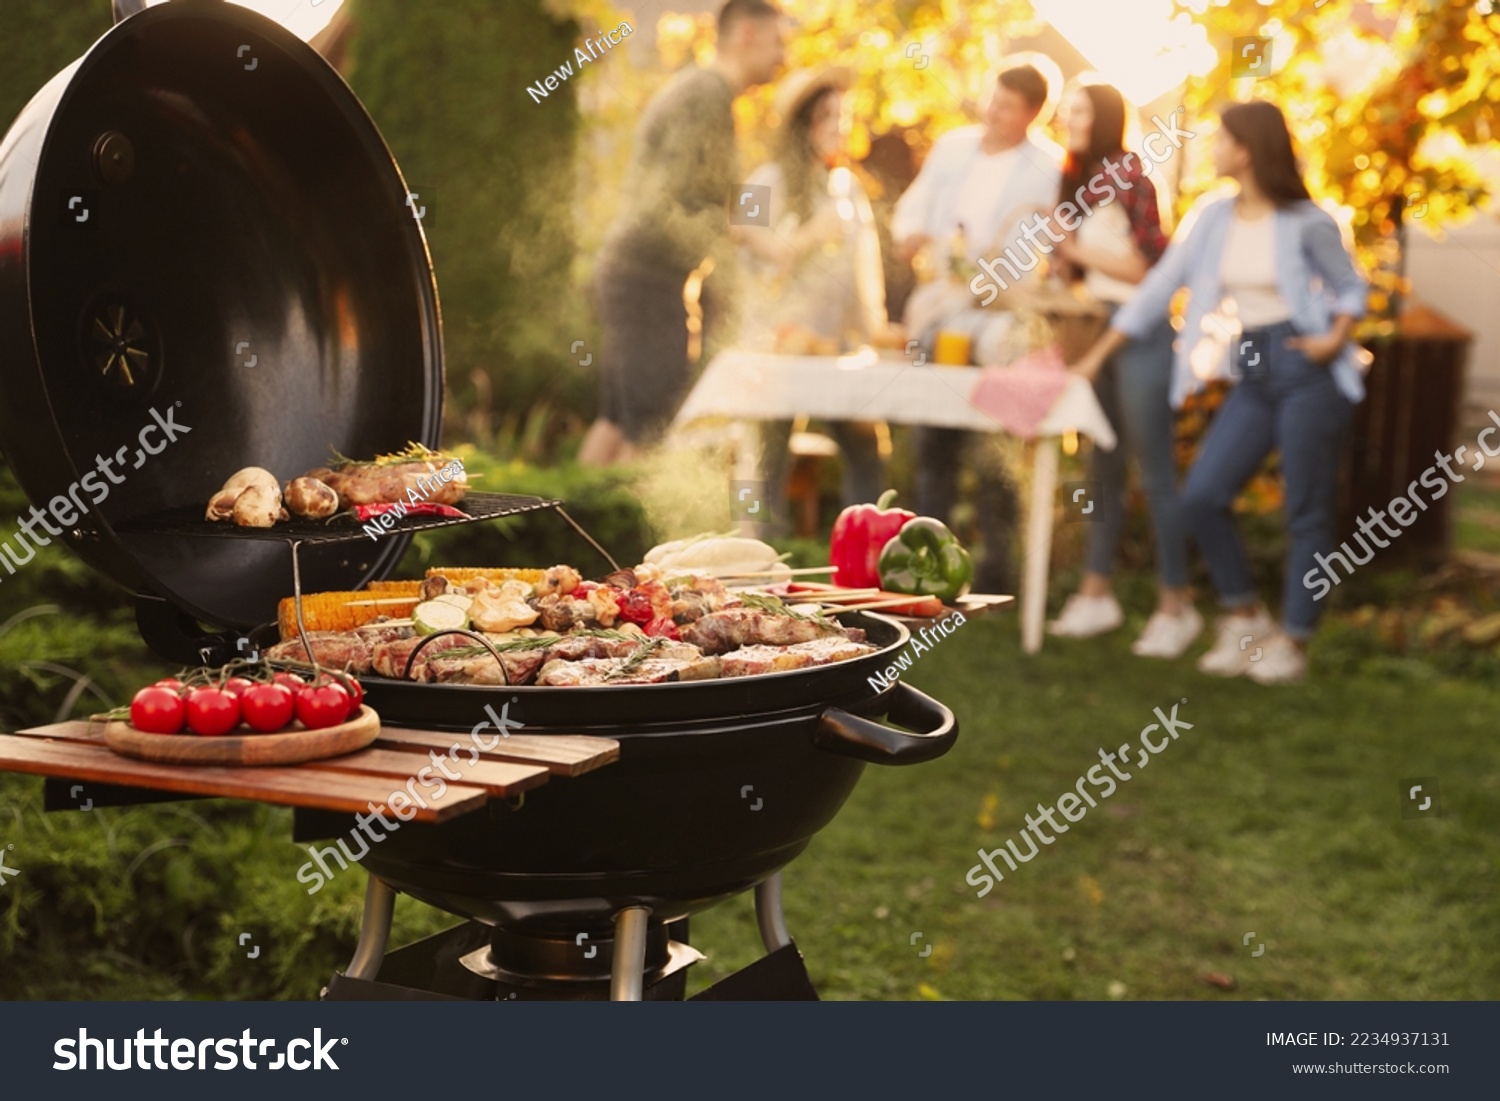 Group of friends having party outdoors. Focus on barbecue grill with food. Space for text #2234937131